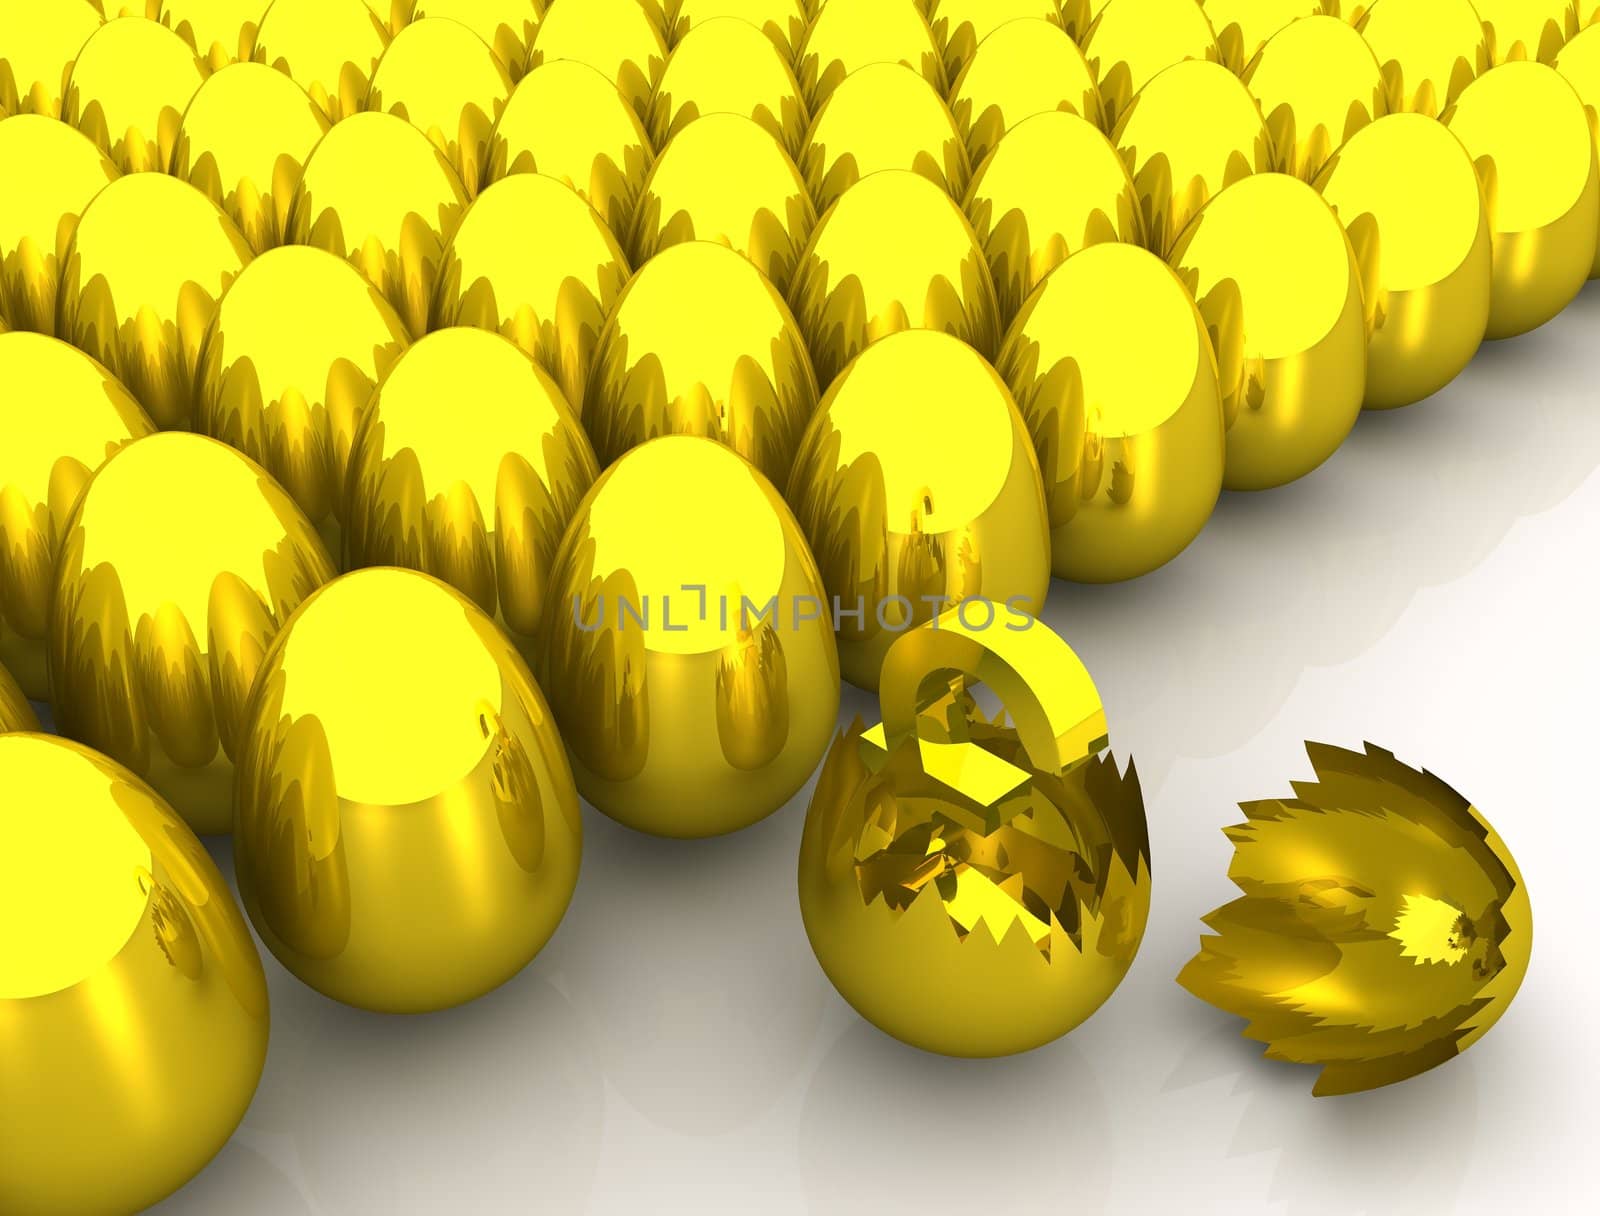 Concept of cracked golden egg with golden Pound symbol hidden inside. Rendered on white background with crowd of uncracked eggs.